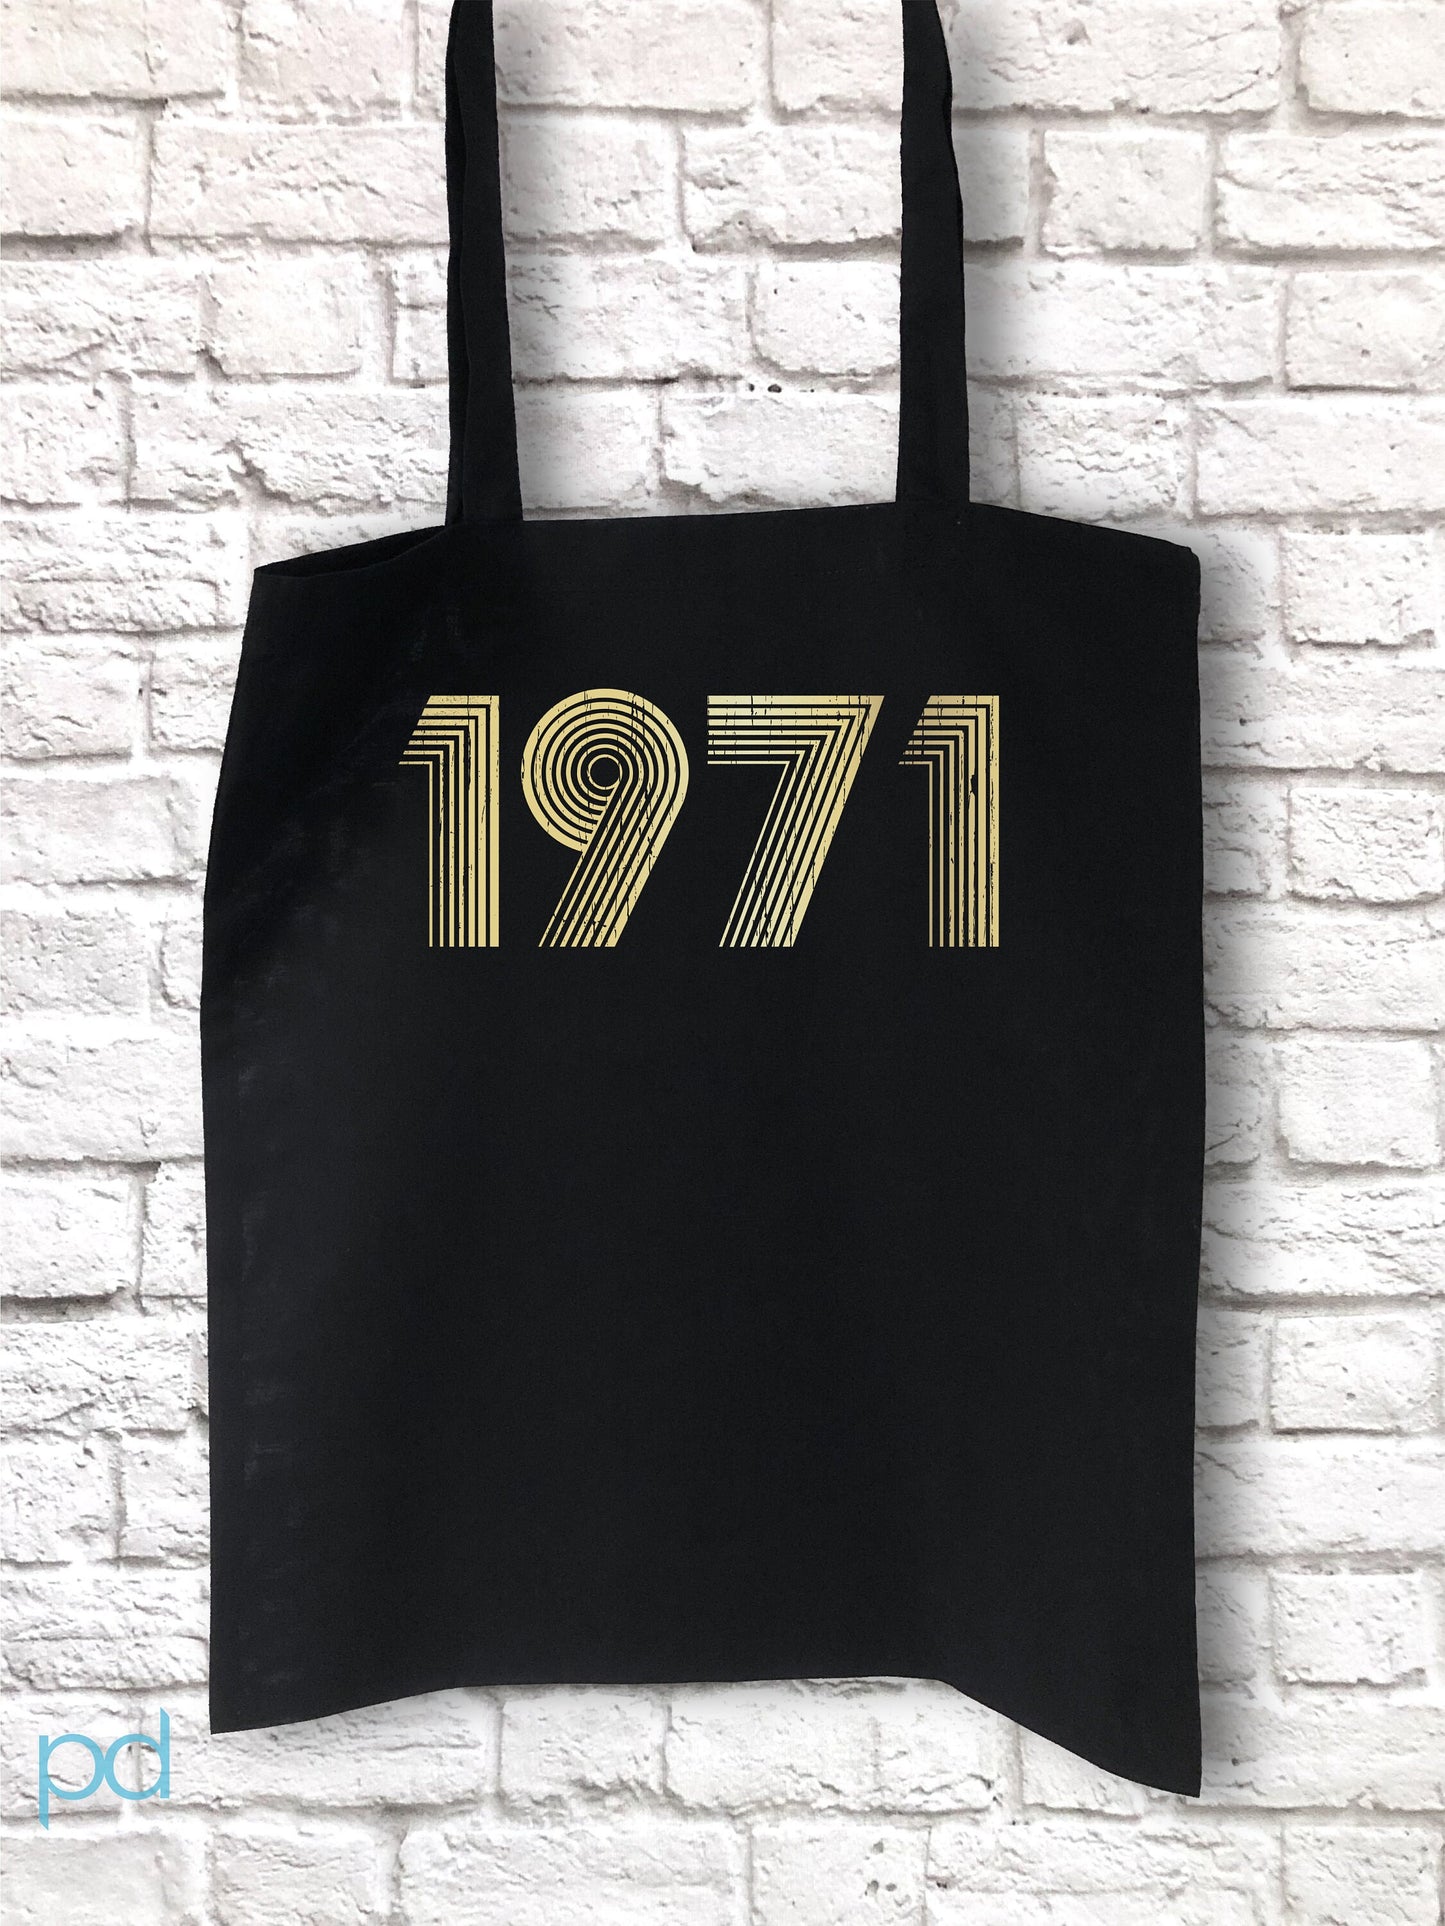 1971 Tote Bag Metallic Gold Foil, 51st Birthday Gift Tote Bag in Vintage 70s style, Fiftieth Reusable Shopping Carrier Bag